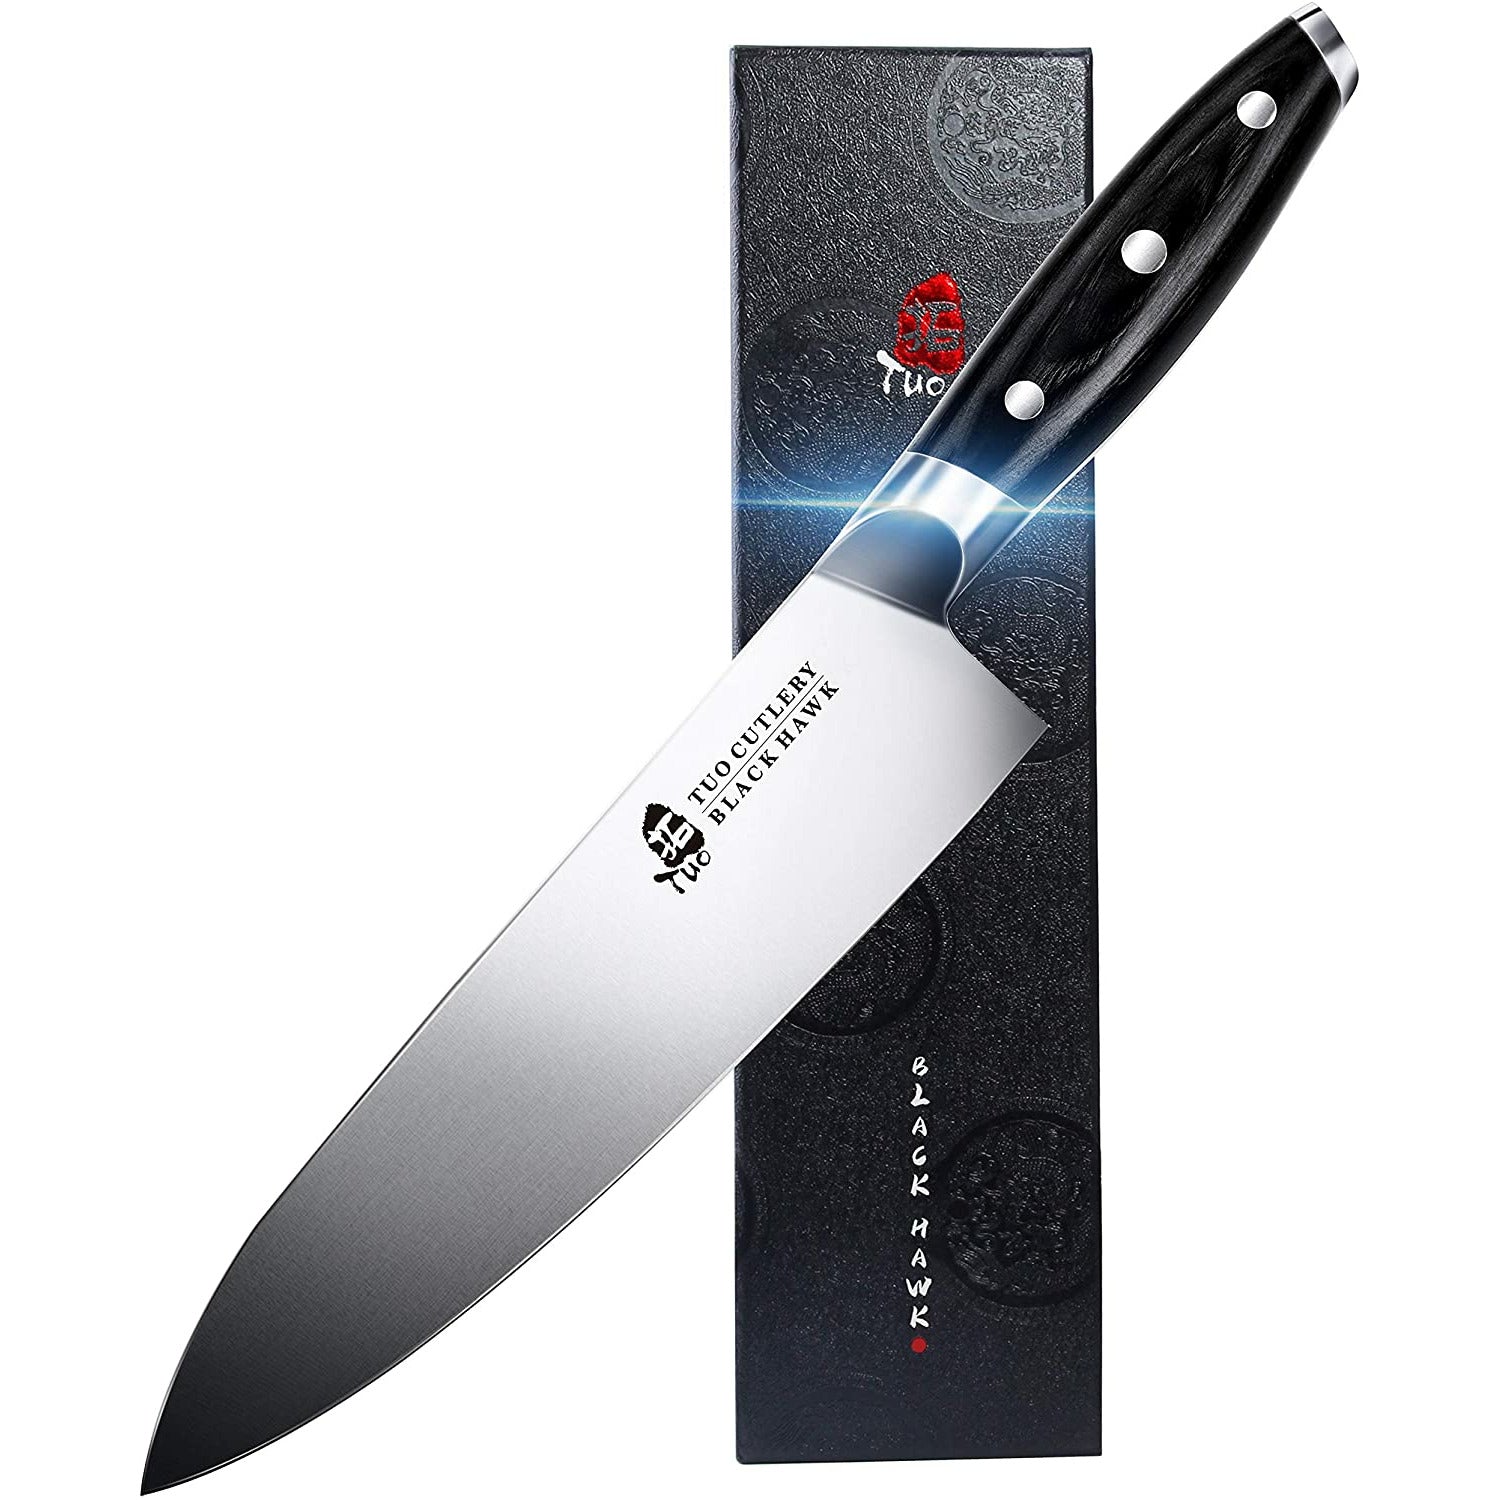 Cutluxe Chef Knife – 8 inch